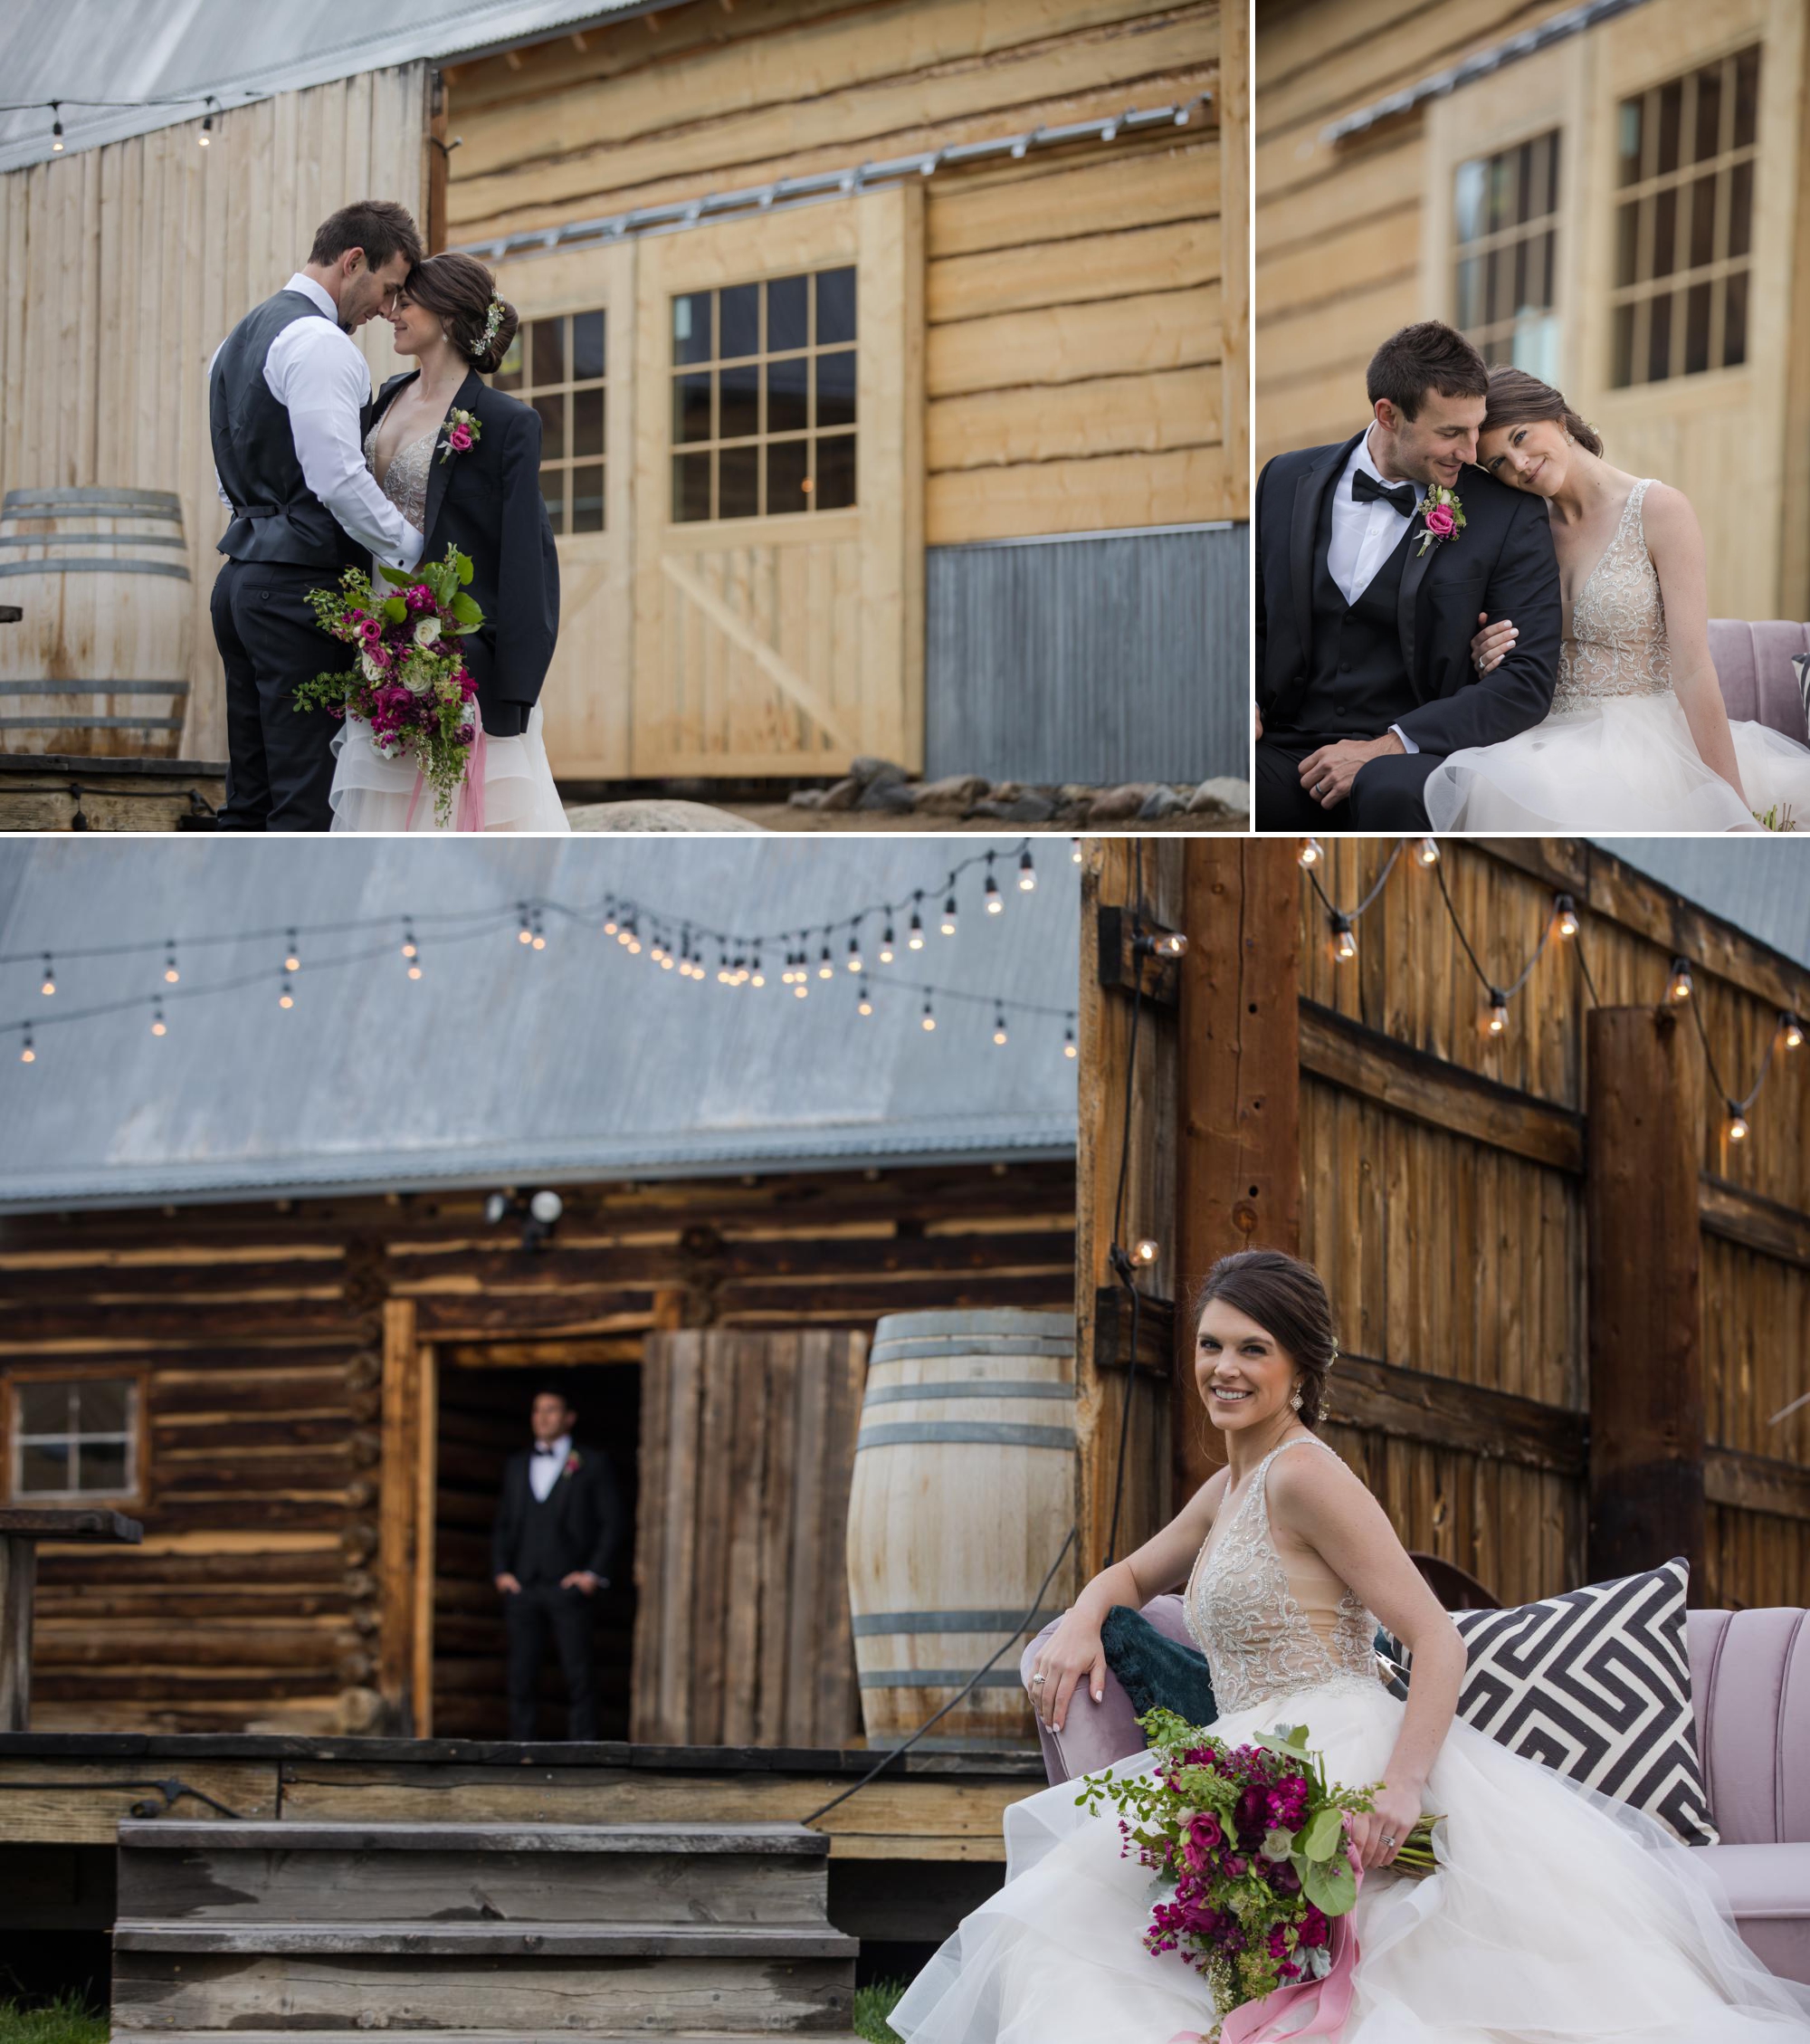 couple poses for wedding photographer at rustic barn venue